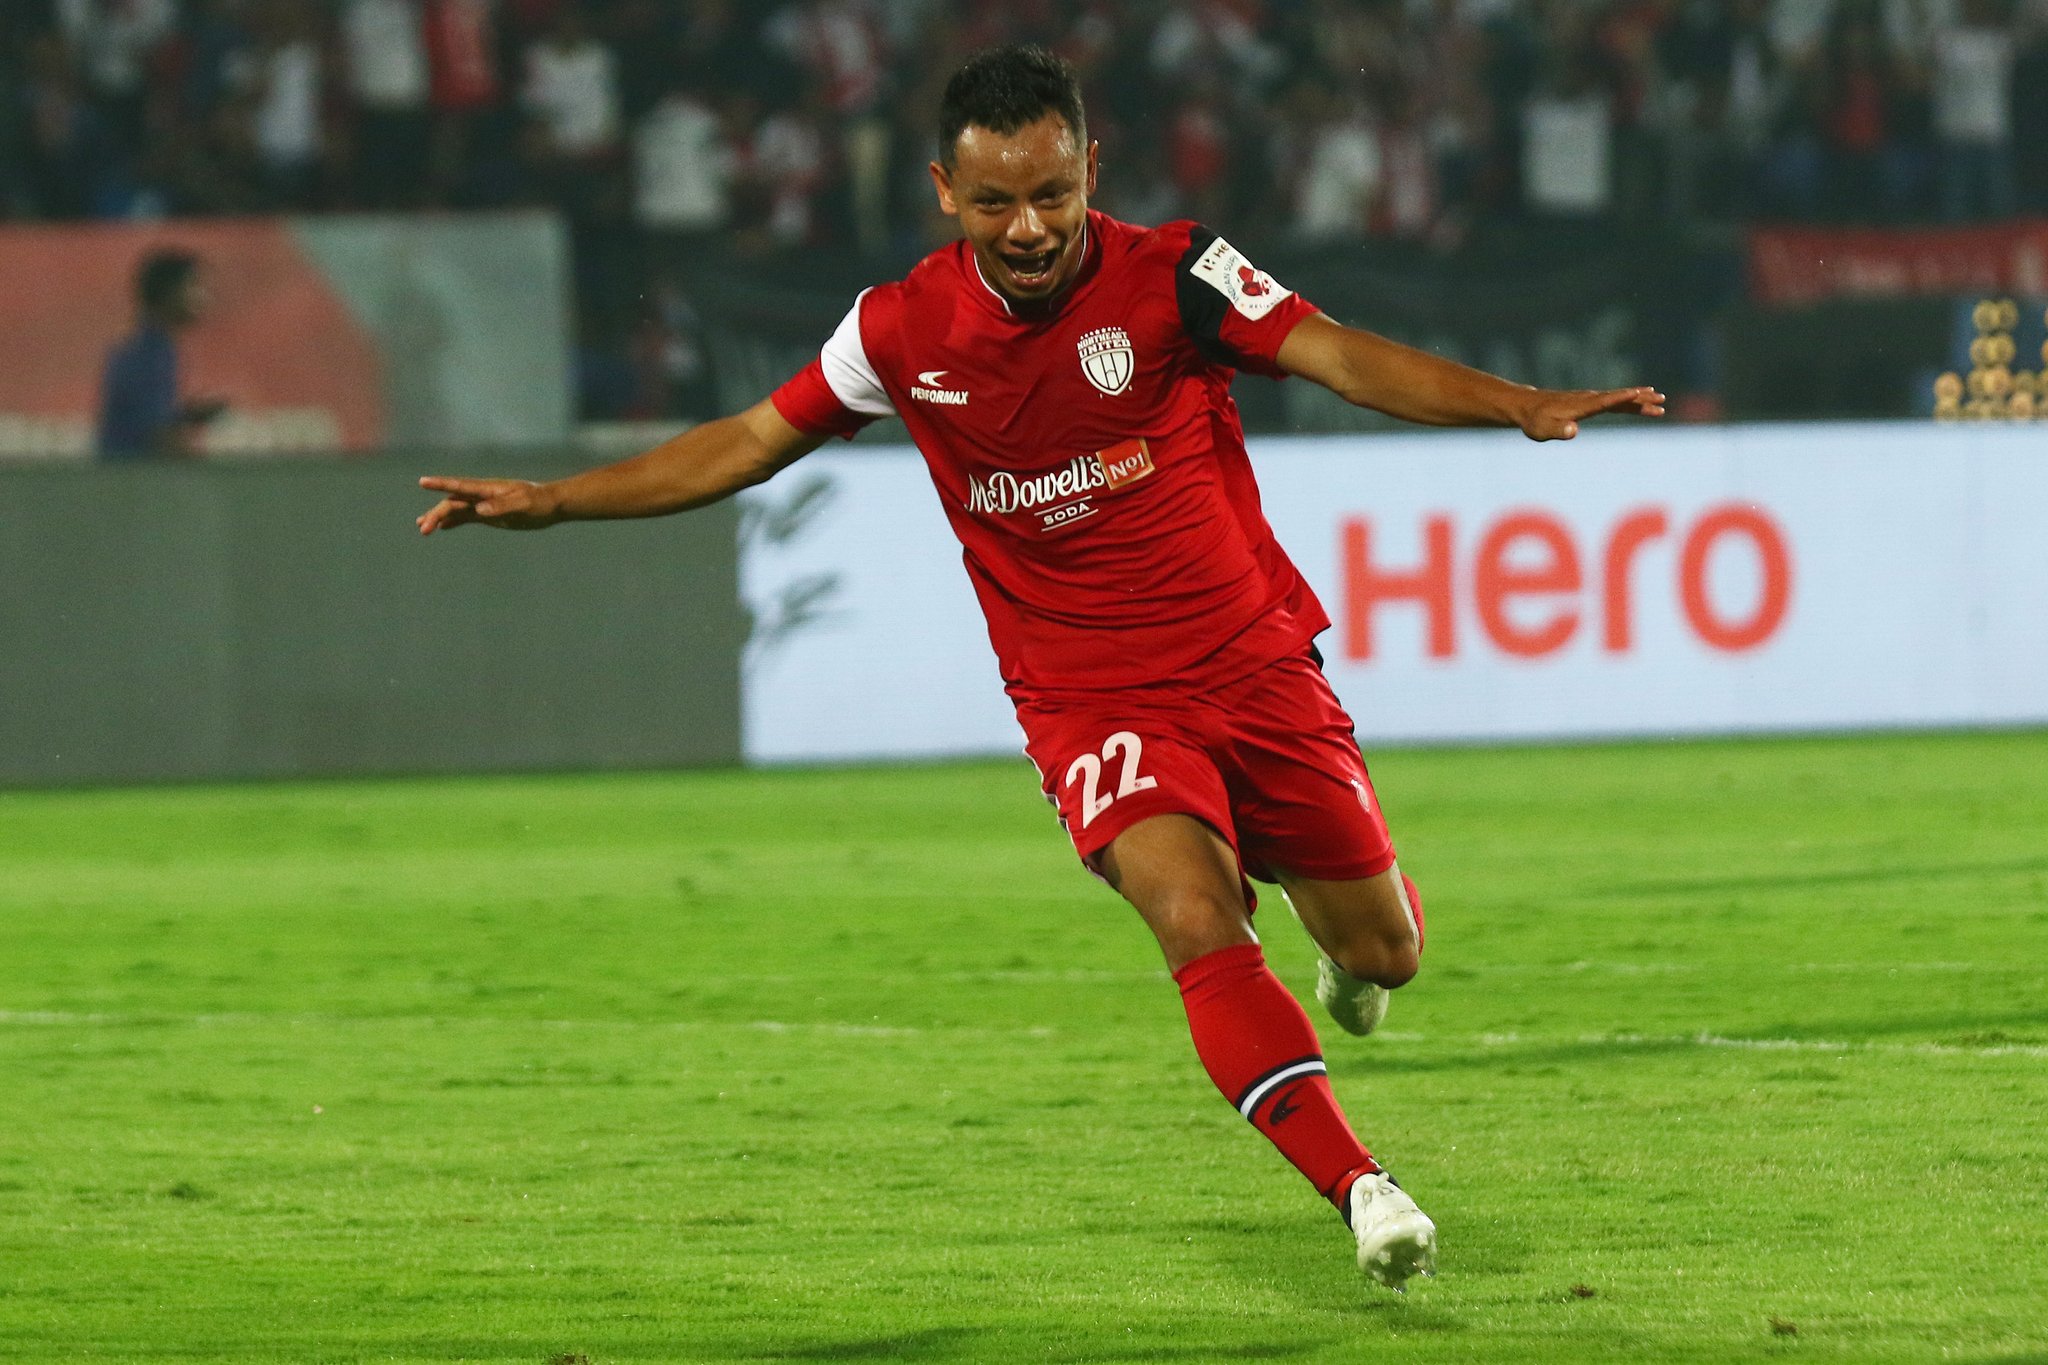 Being part of FC Goa is one of the best moments of my life, admits Redeem Tlang